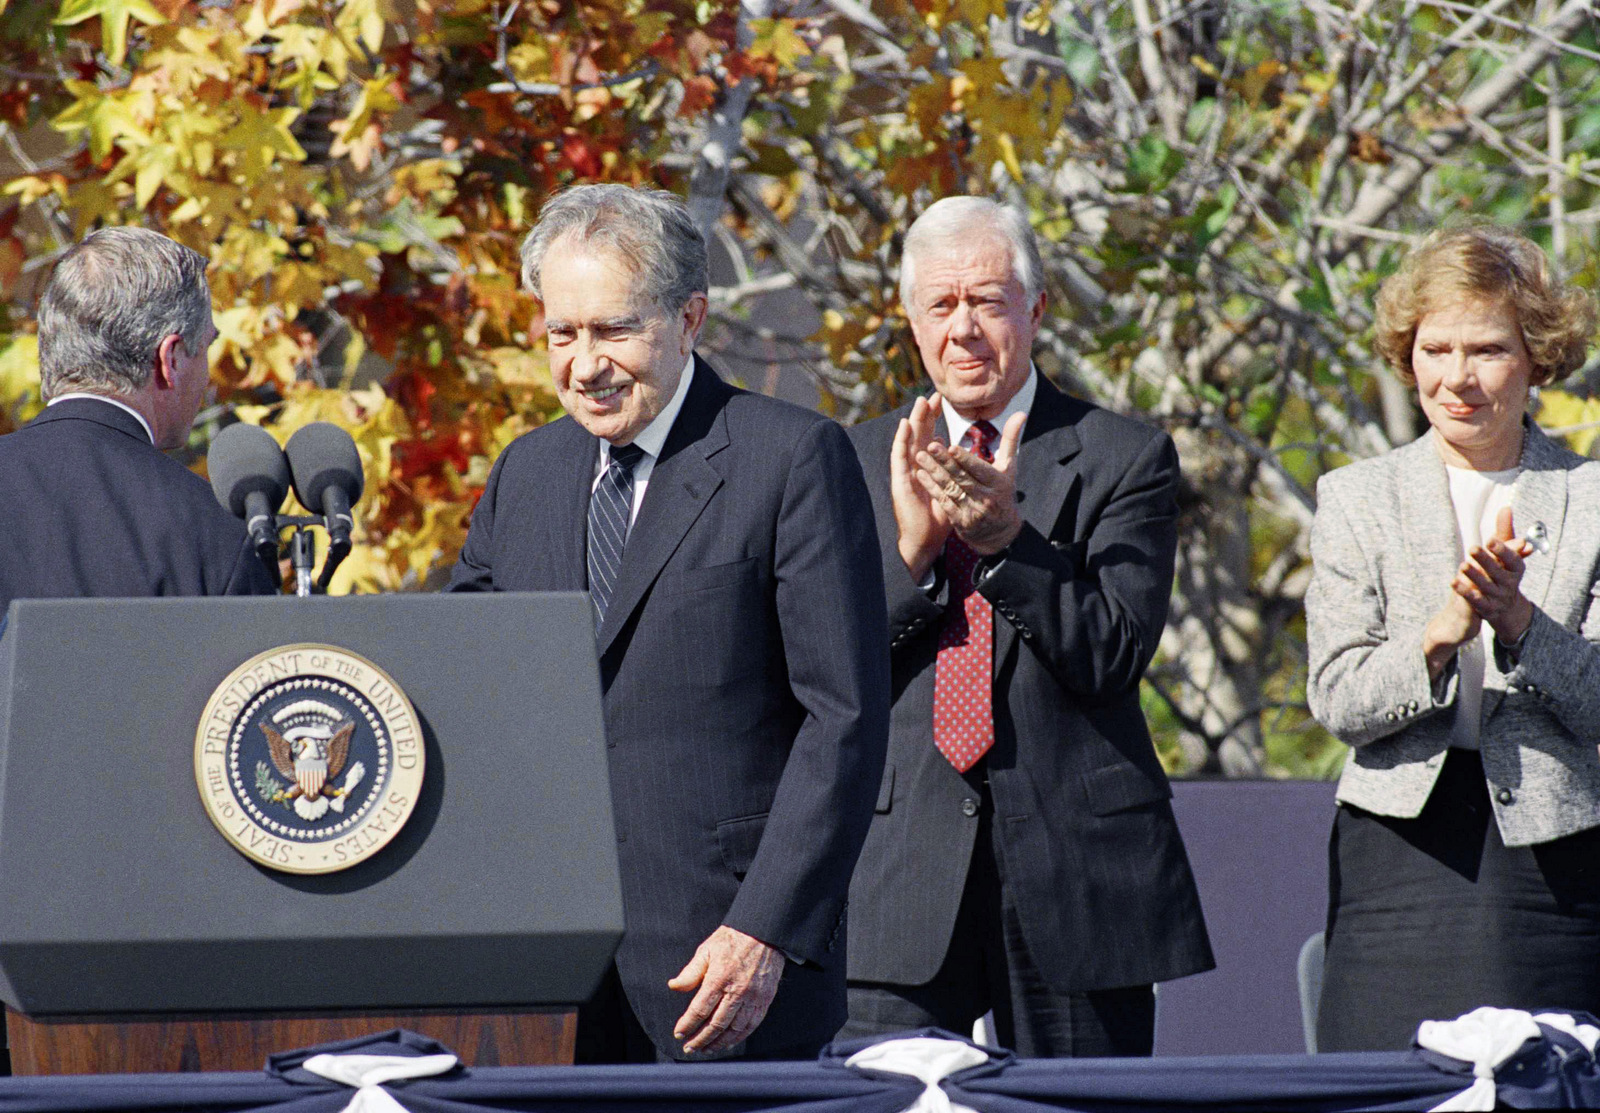 Former President Jimmy Carter applauds former President Richard M. Nixon as he is introduced at the dedication ceremony for the Ronald Reagan Presidential Library in Simi Valley, California Monday, Nov. 4, 1991. The gathering was the first ever by five U.S. Presidents. (AP/Craig Fujii)